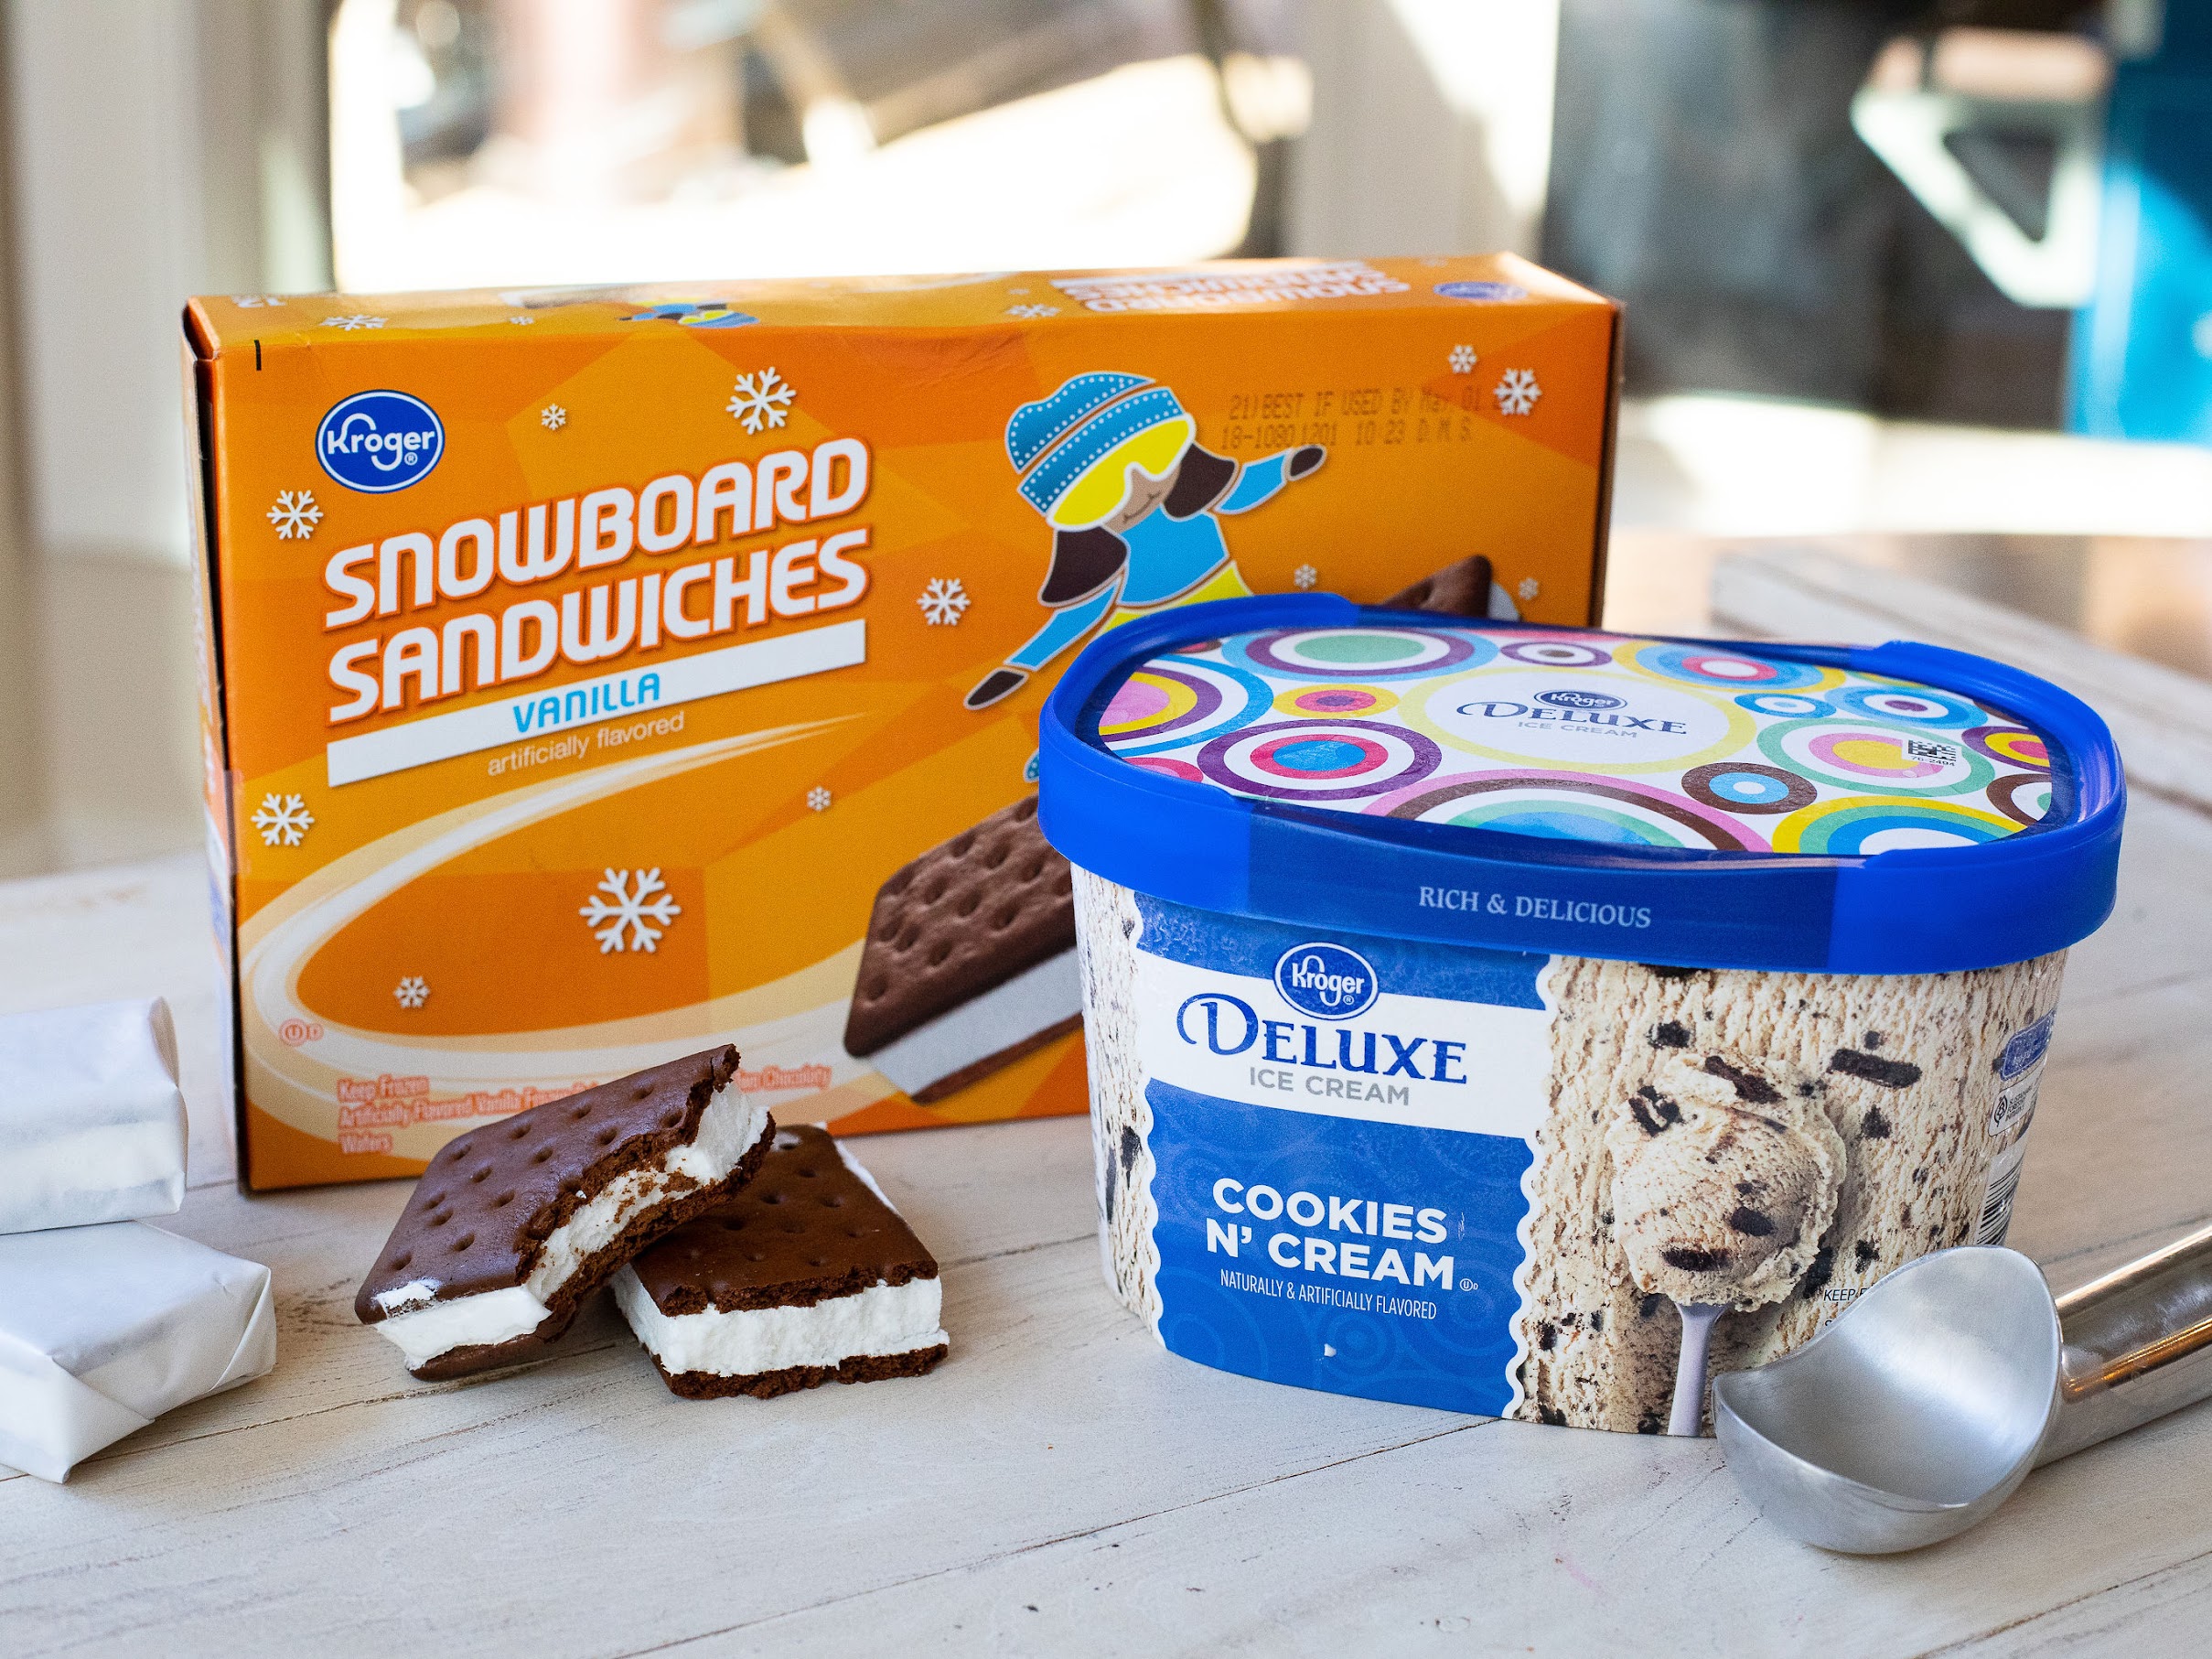 Get Kroger Deluxe Ice Cream For Just $1.97